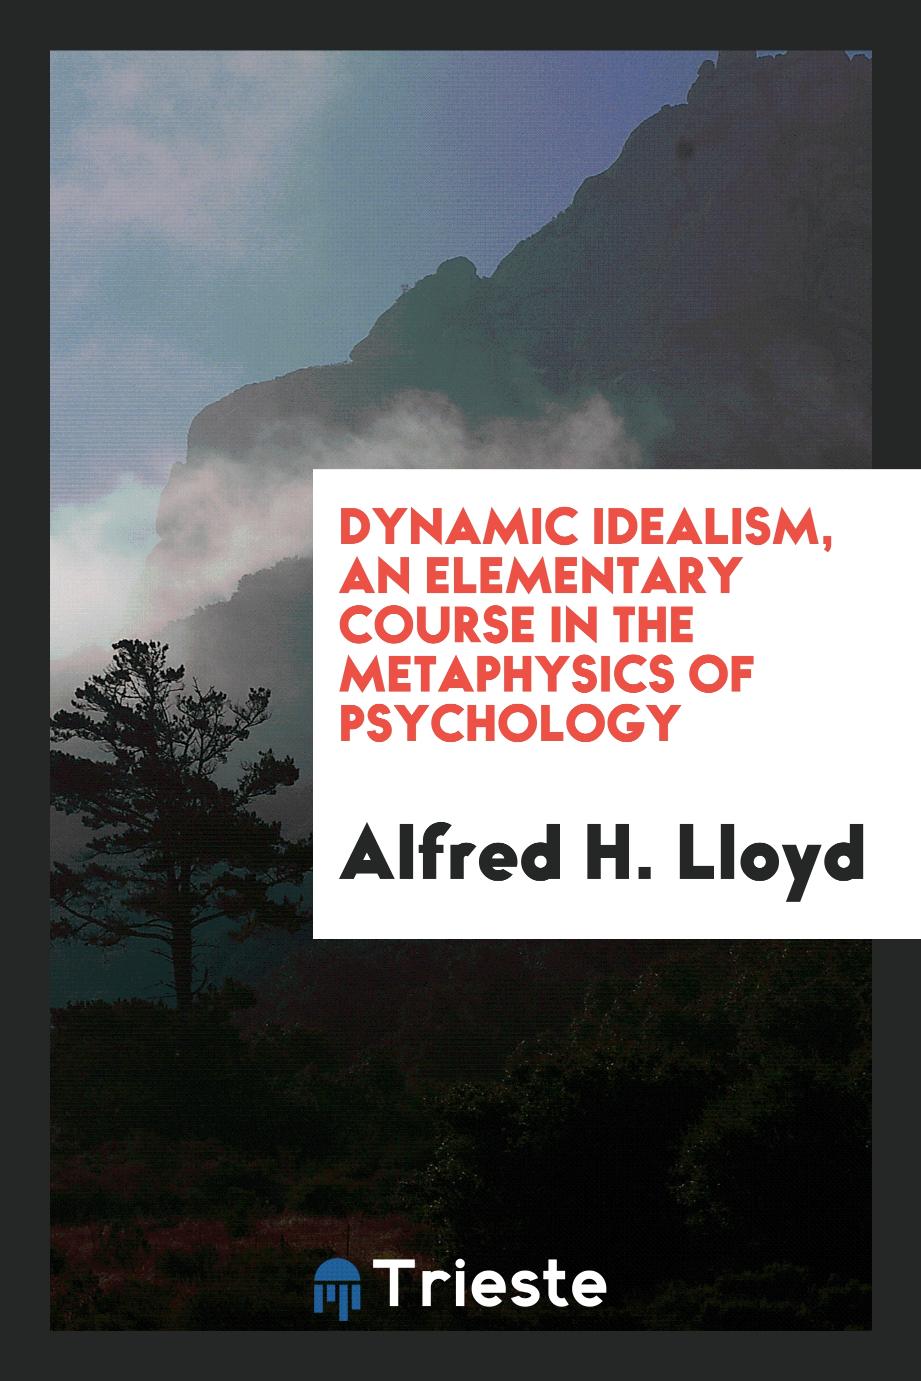 Dynamic idealism, an elementary course in the metaphysics of psychology